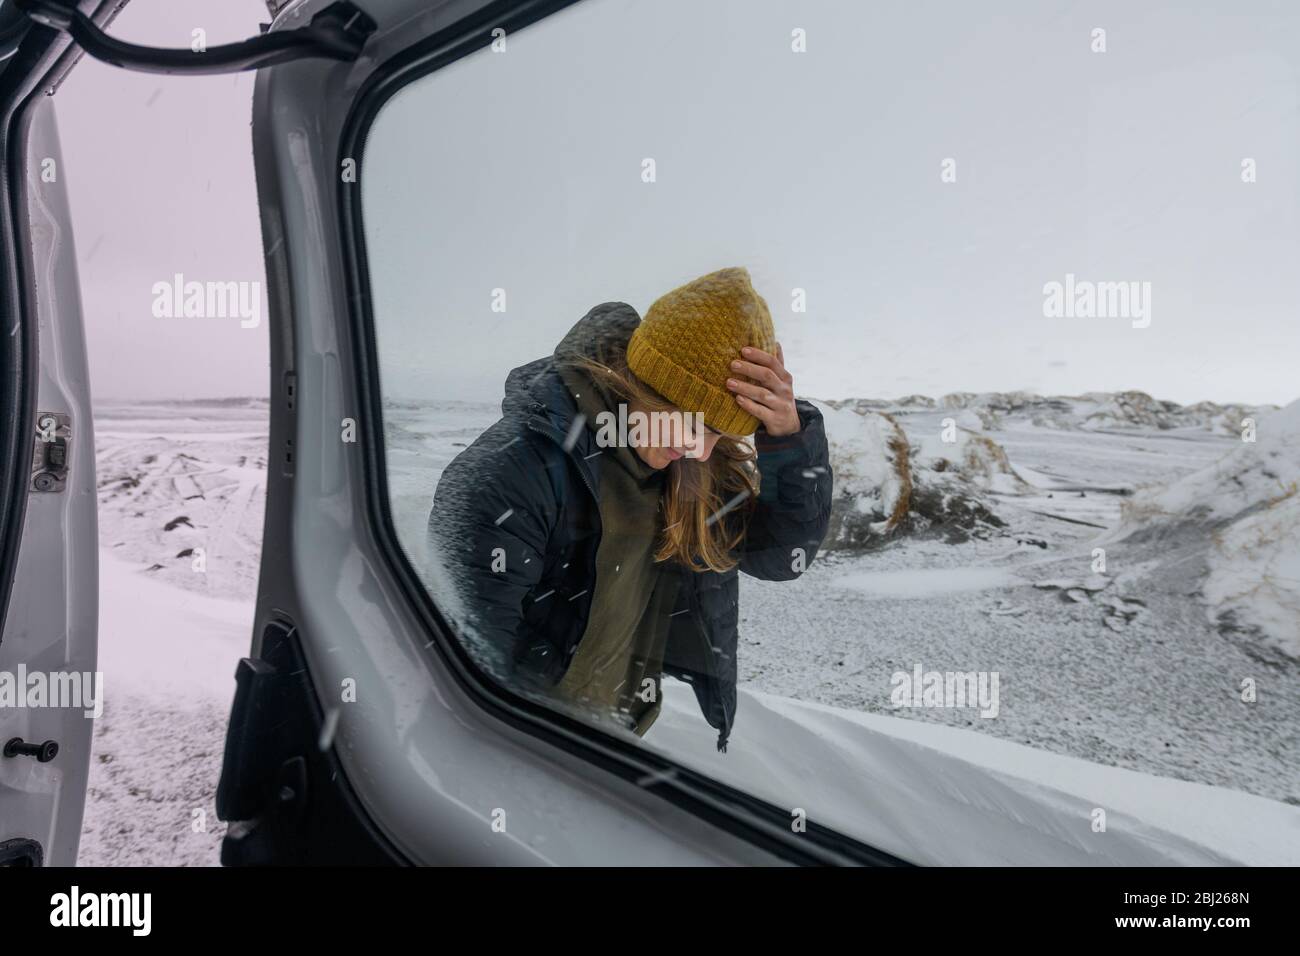 A woman wearing a woolly hat and jacket standing in a snowy landscape through a campervan window. Winter Surfing. Stock Photo